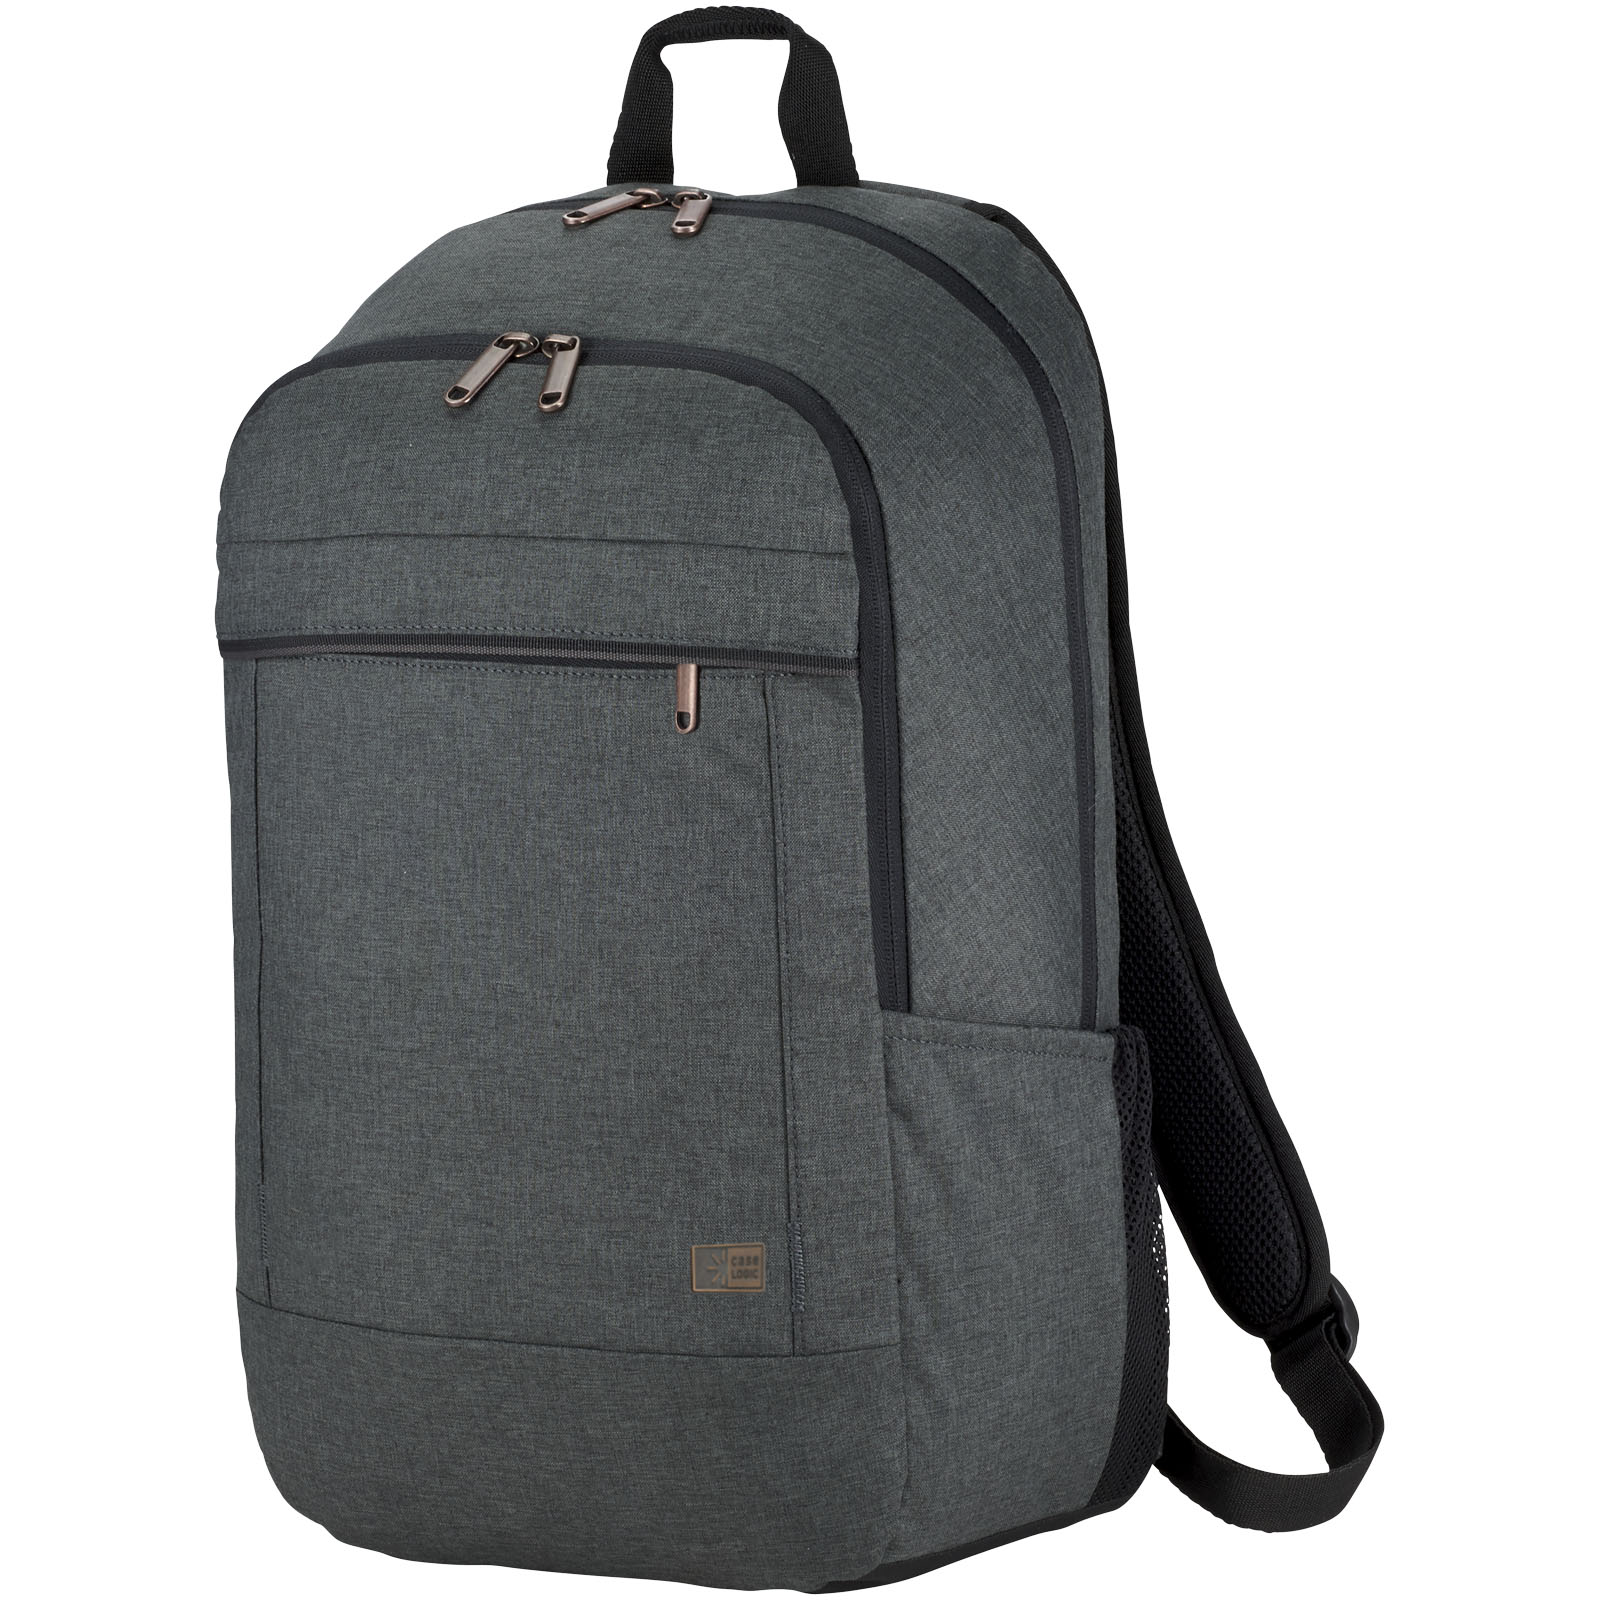 City backpack KERRI with space for 15" computer - heather grey